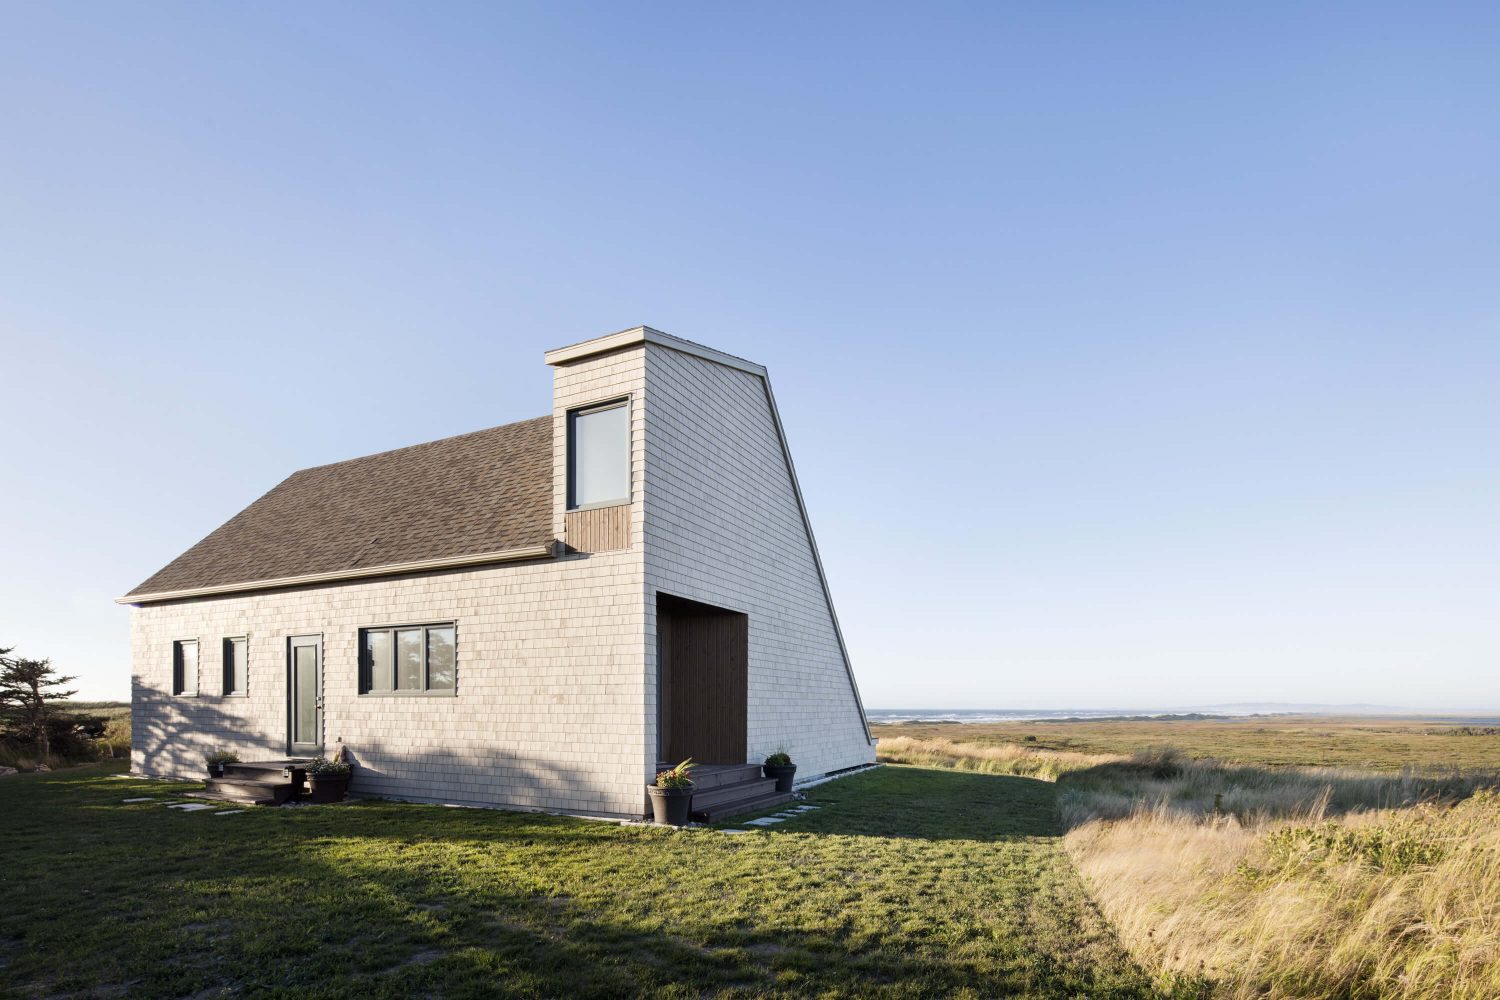 West Dune House by Bourgeois / Lechasseur architectes